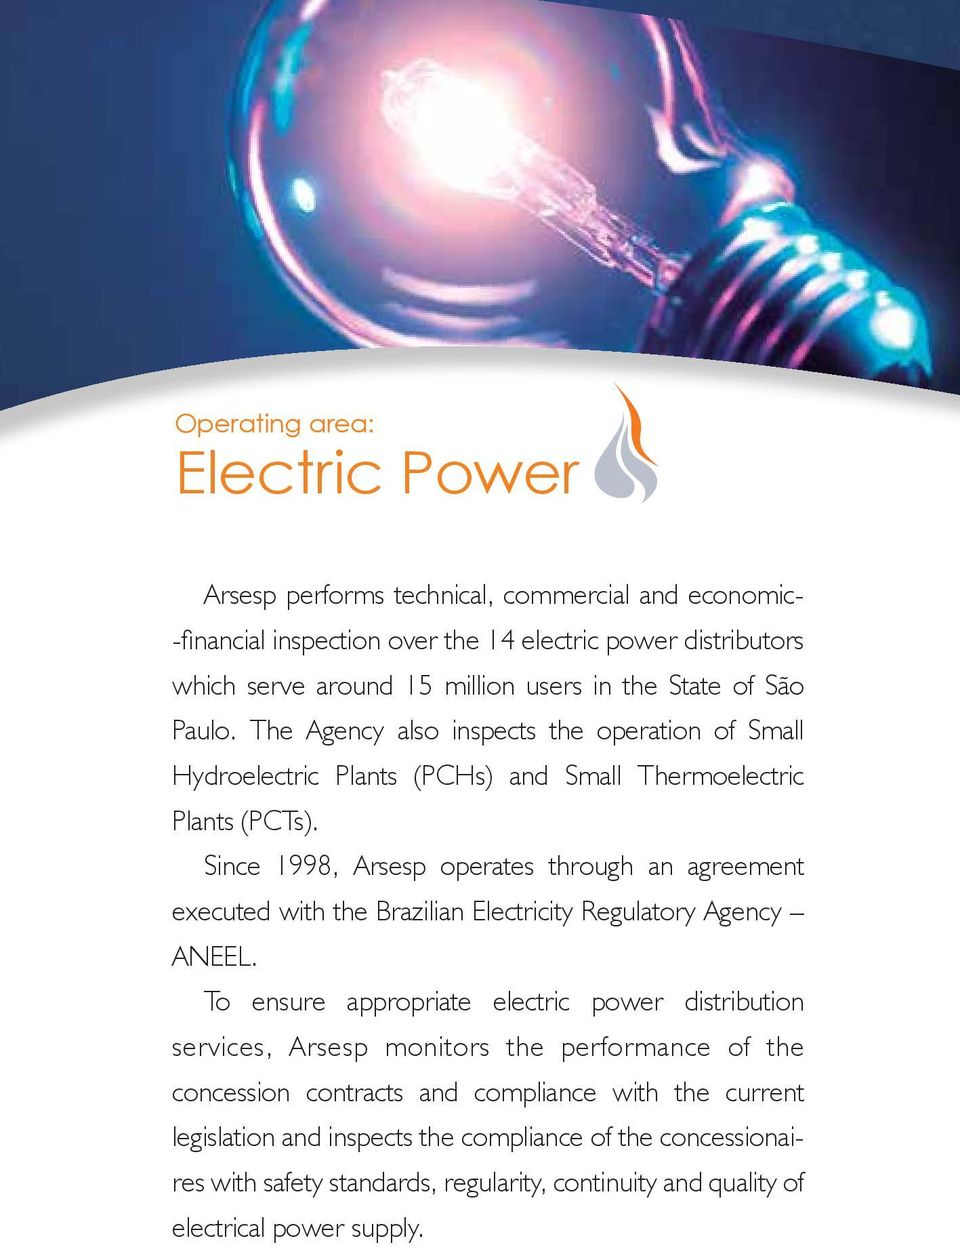 Since 1998, Arsesp operates through an agreement executed with the Brazilian Electricity Regulatory Agency ANEEL.